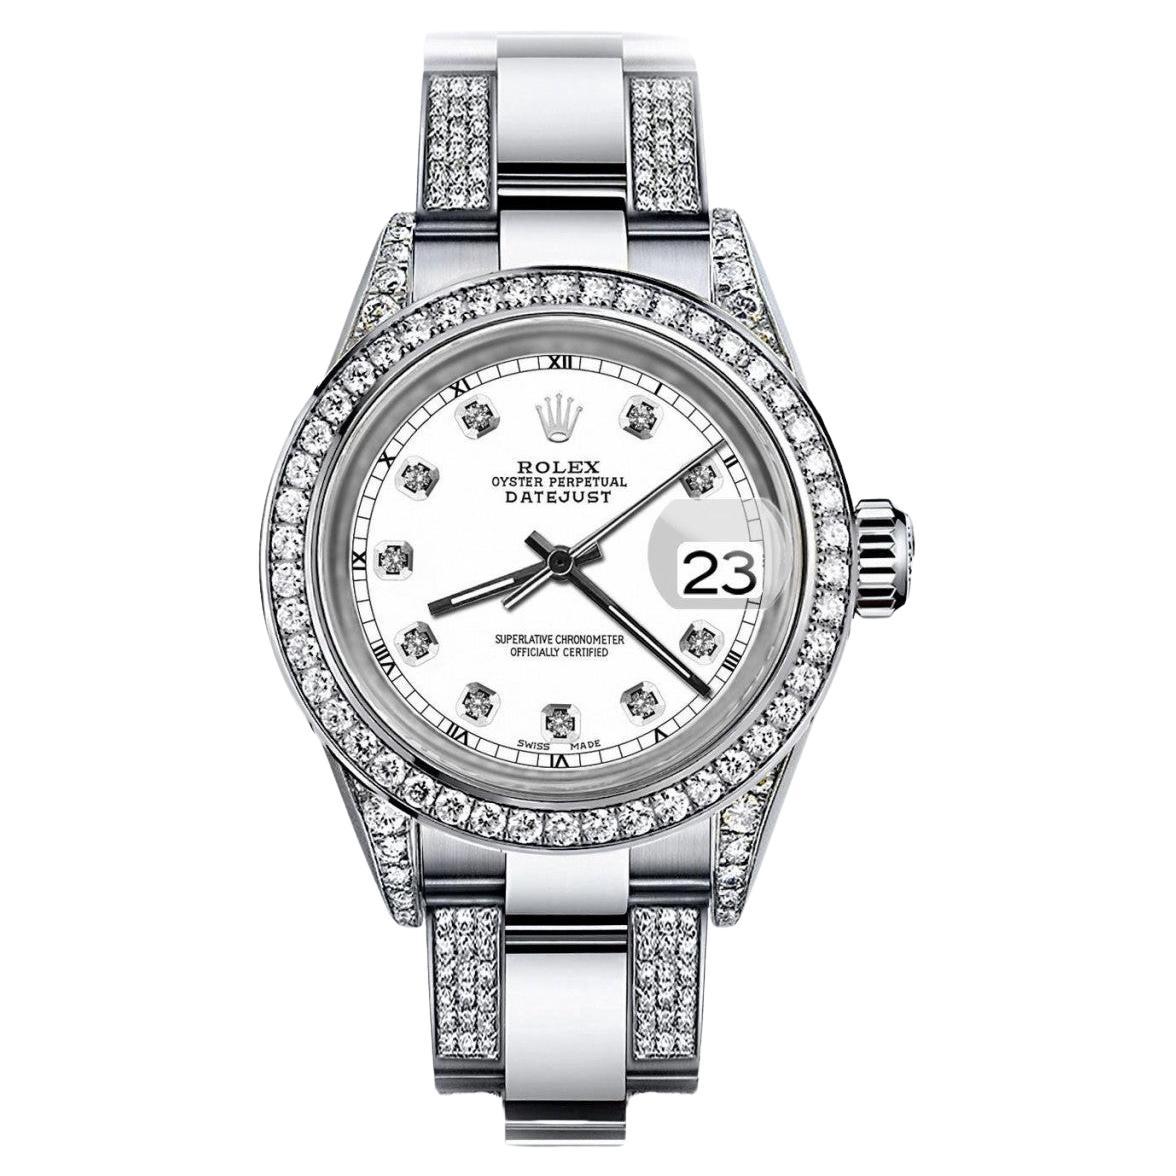 Ladies Rolex White Track Datejust S/S Oyster Perpetual Diamond Watch 69160